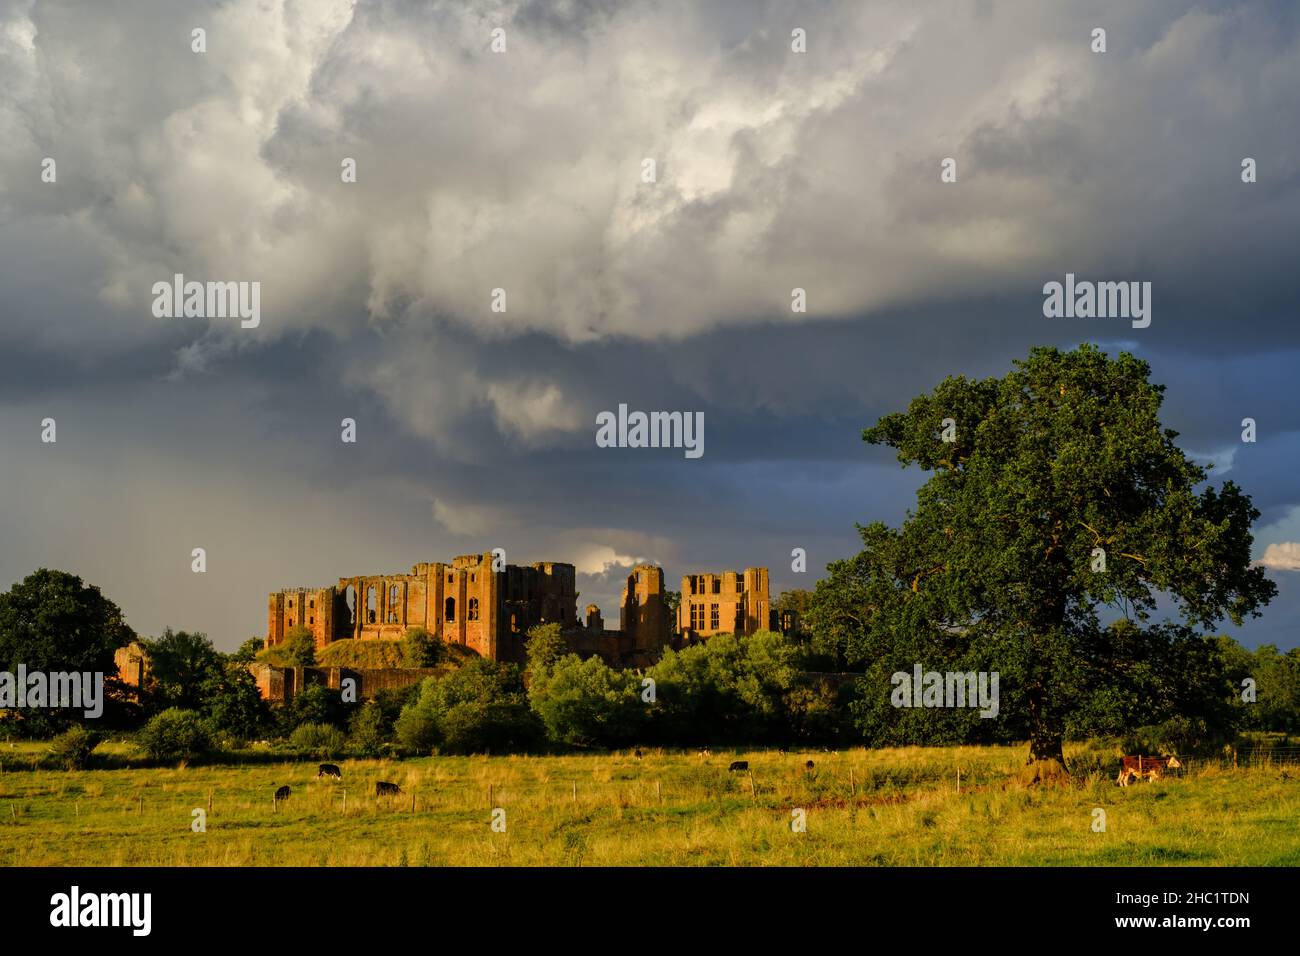 A retreating storm over Kenilworth Castle in Warwickshire, UK, taken shortly before sunset. Stock Photo